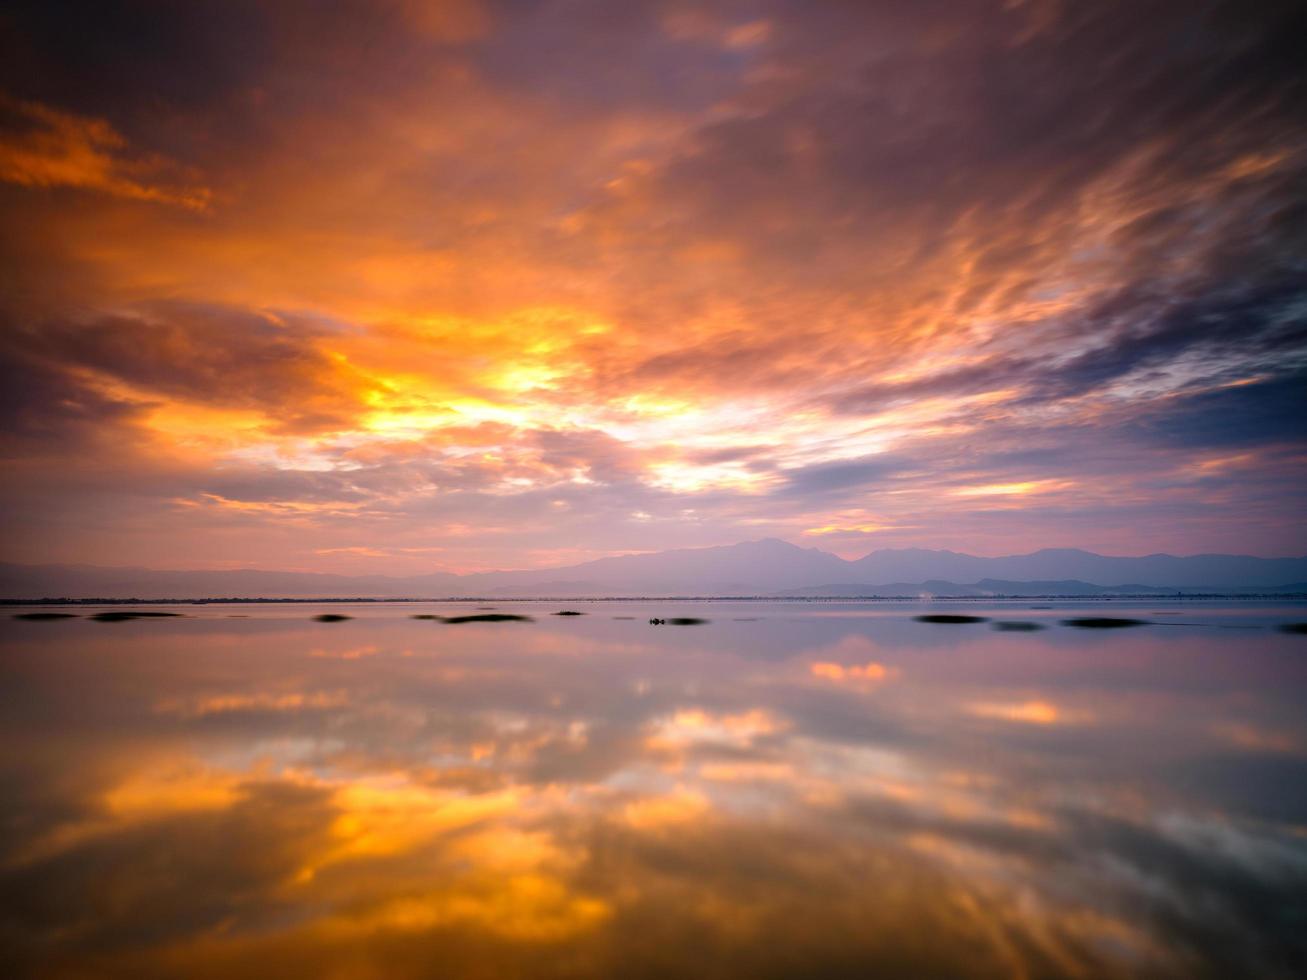 Sunset reflecting in still water photo